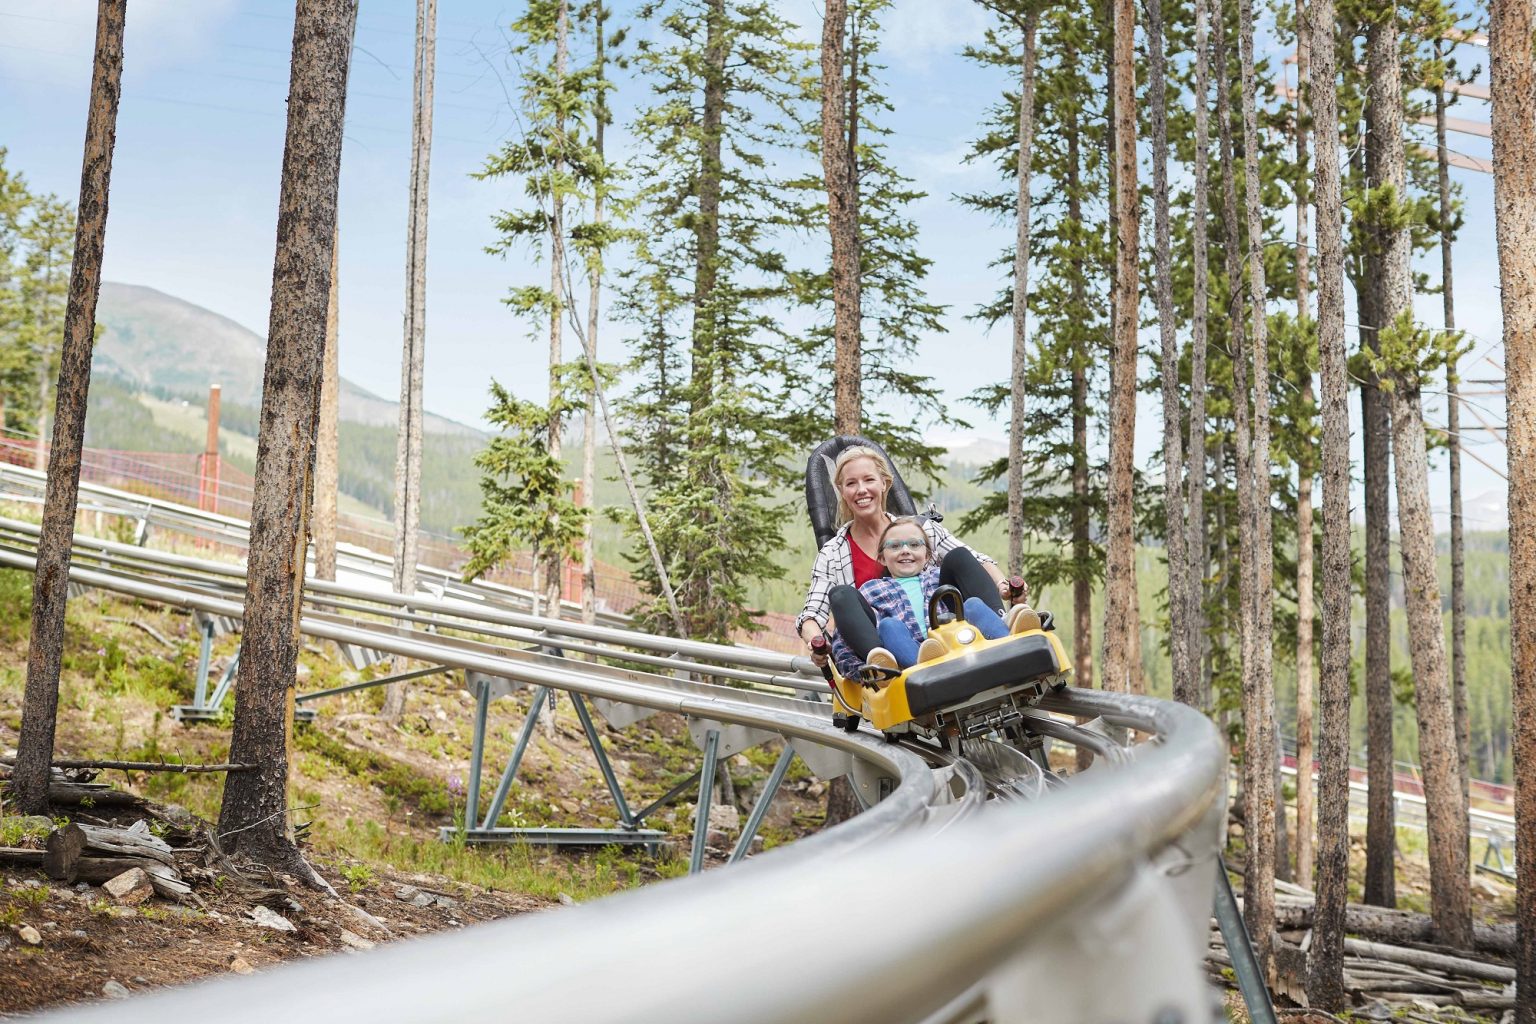 A mother and daughter riding the coaster in Breckenridge